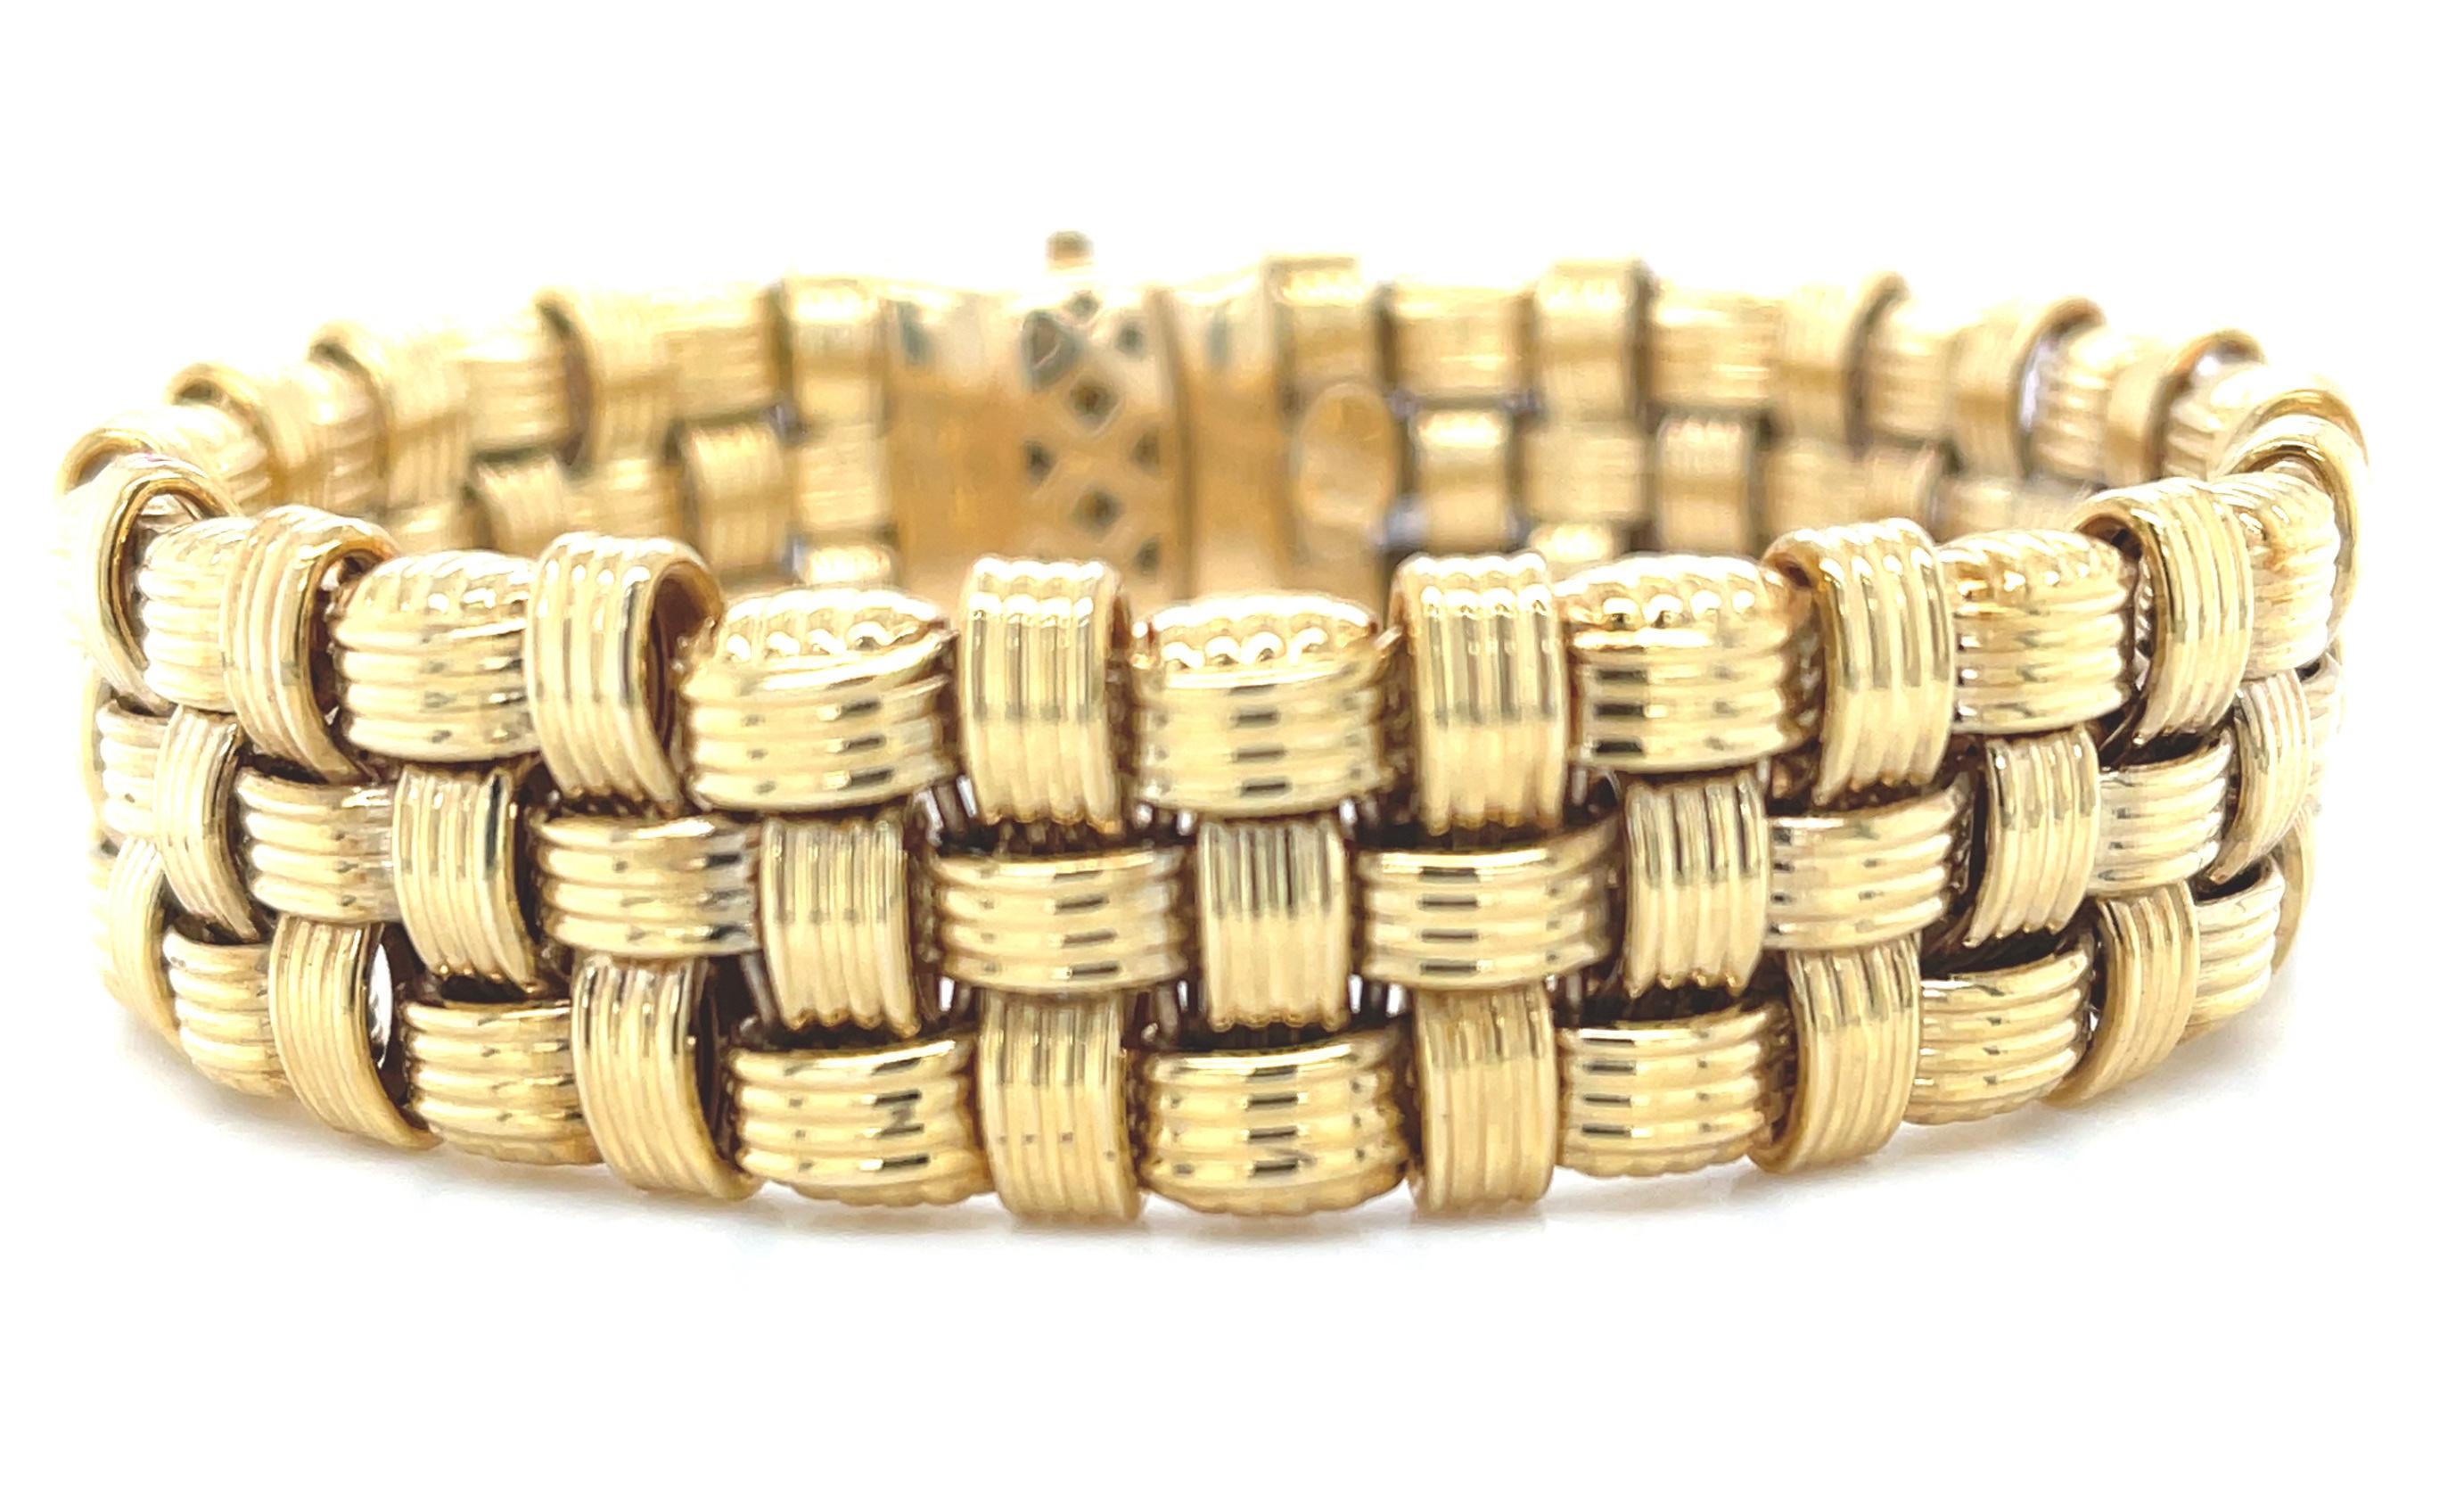 This gorgeous 14k yellow gold Italian bracelet features a beautifully detailed basket weave design that is so stylish and sophisticated, you can wear it everyday and on special occasions! A bold, impressive look,  this wide, flexible bracelet is so